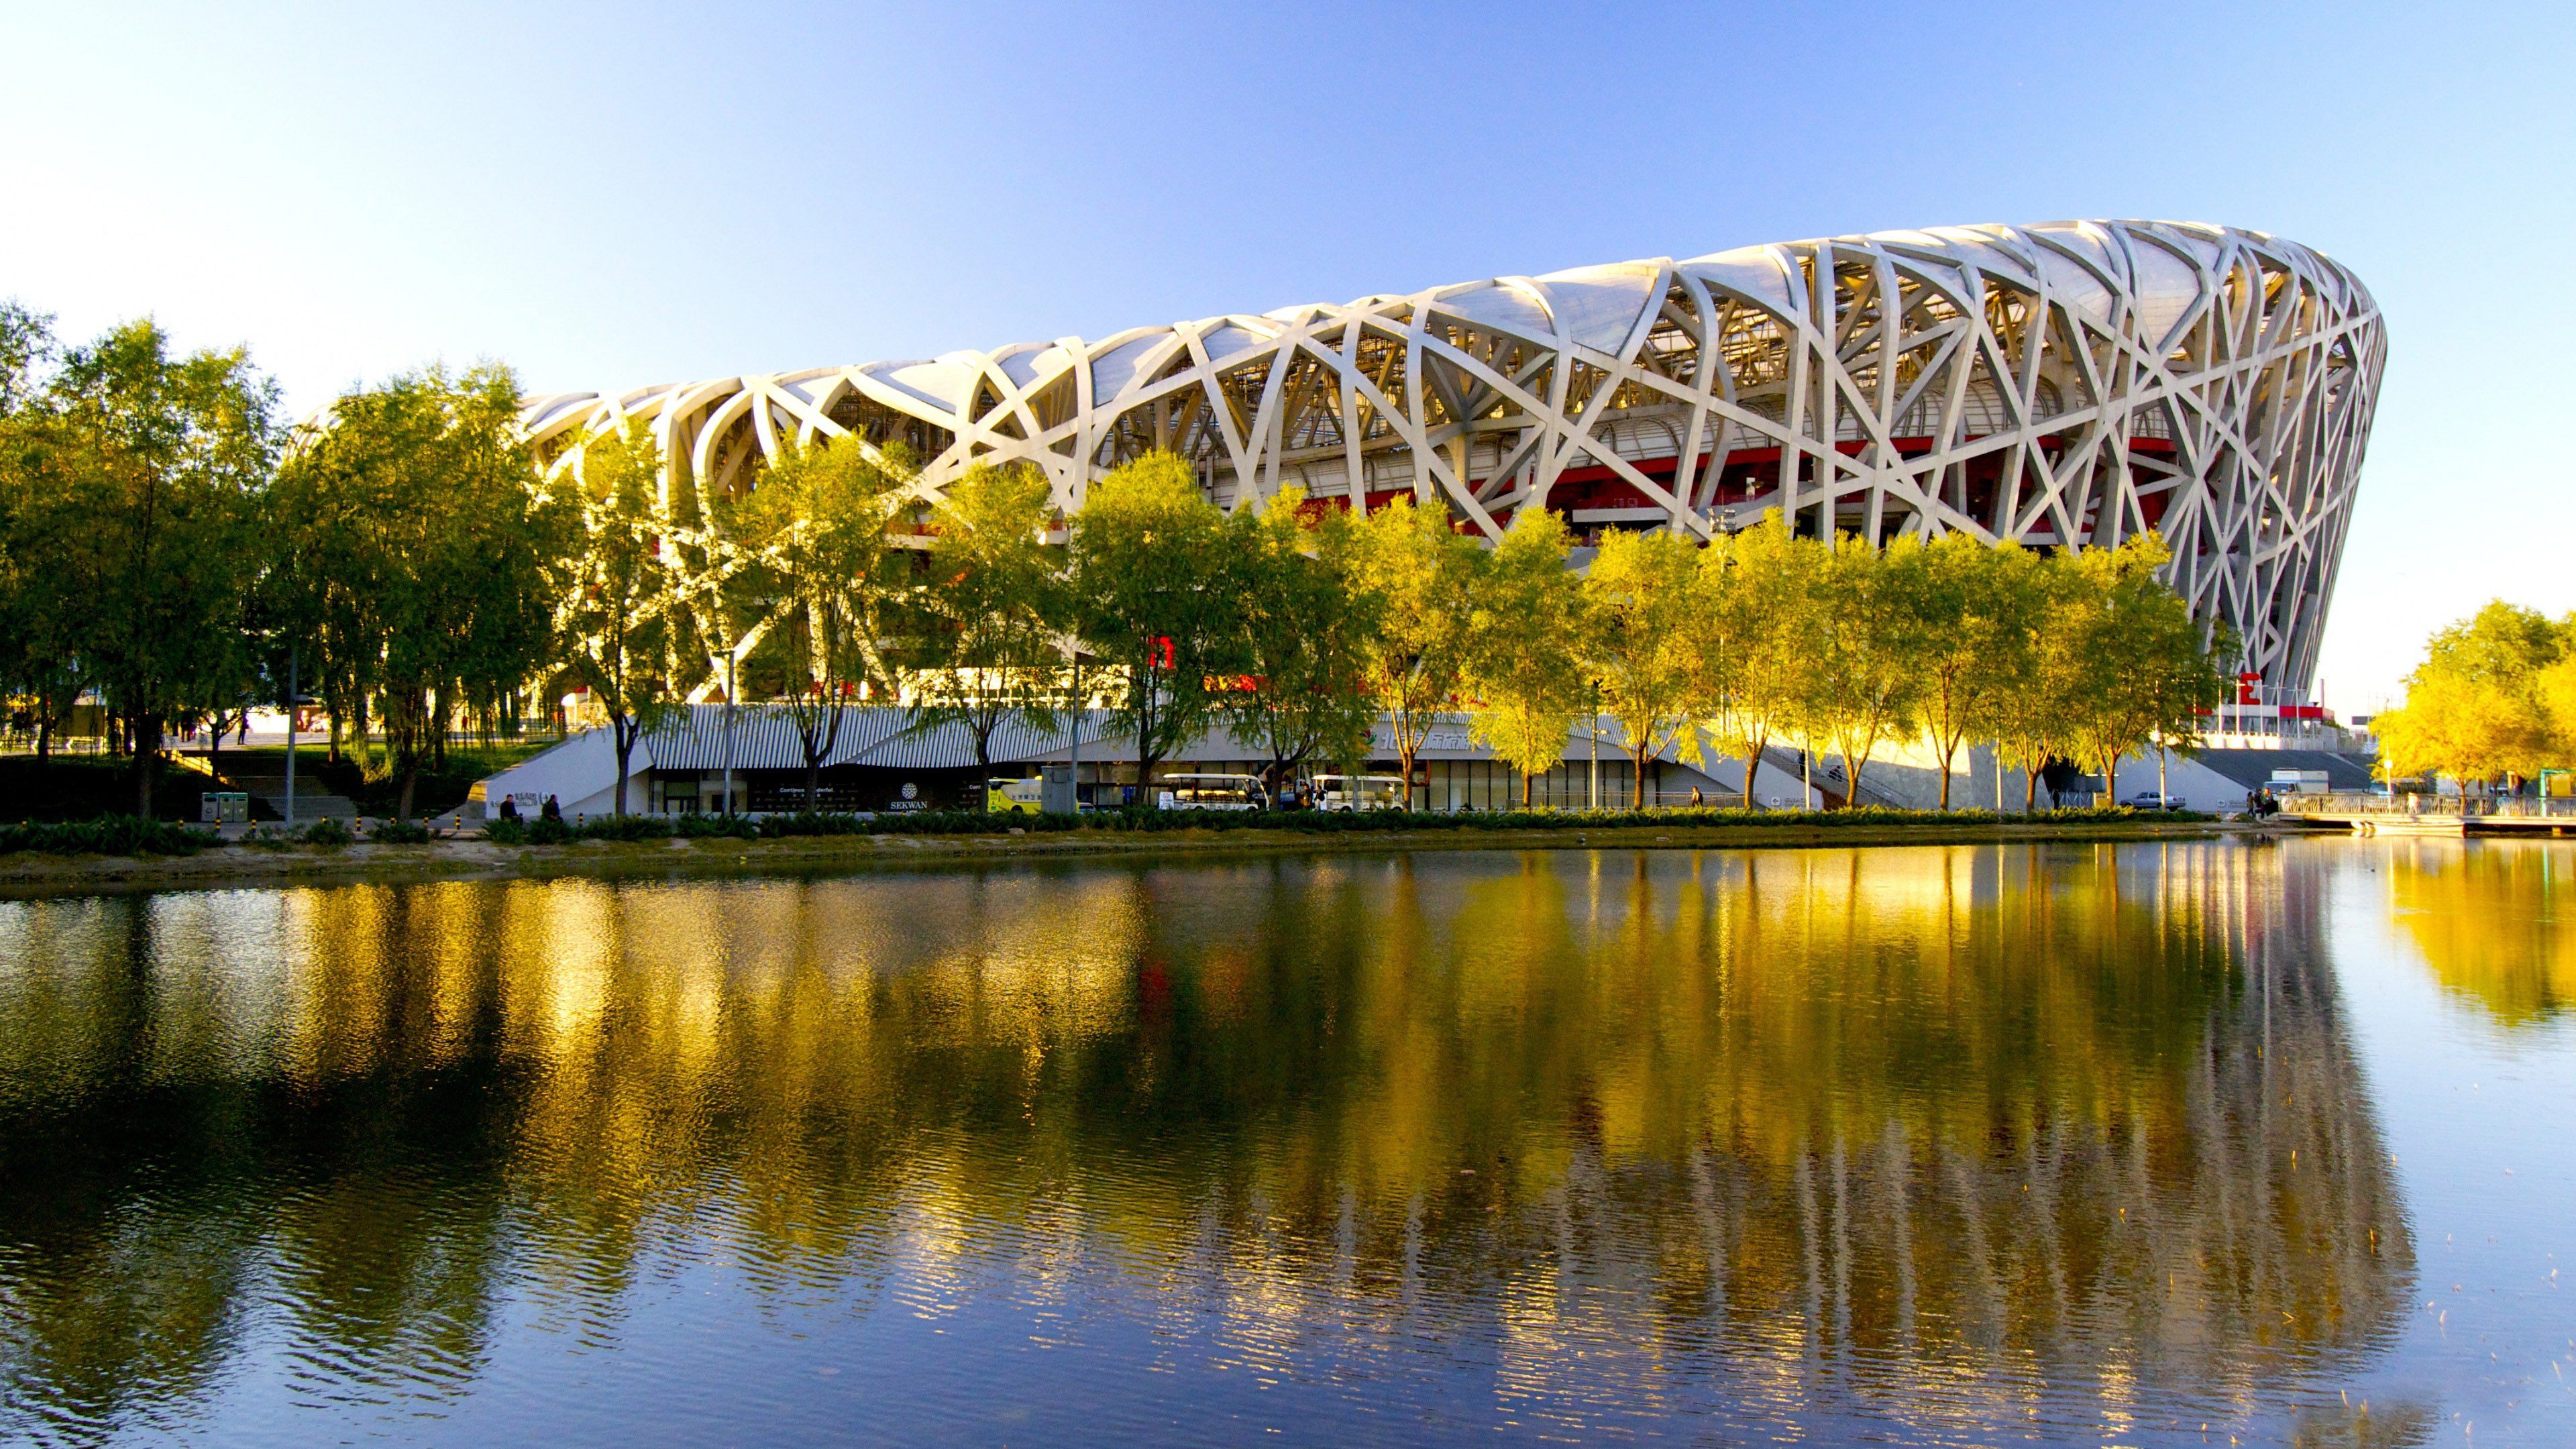 the, Nest, Stadium, China, Afternoon, Sunny, Trees, Lake, Pond, Sky, Hdr, Ultrahd, Black, White, Hd, 4k, Wallpaper, 3840x2160 Wallpaper HD / Desktop and Mobile Background